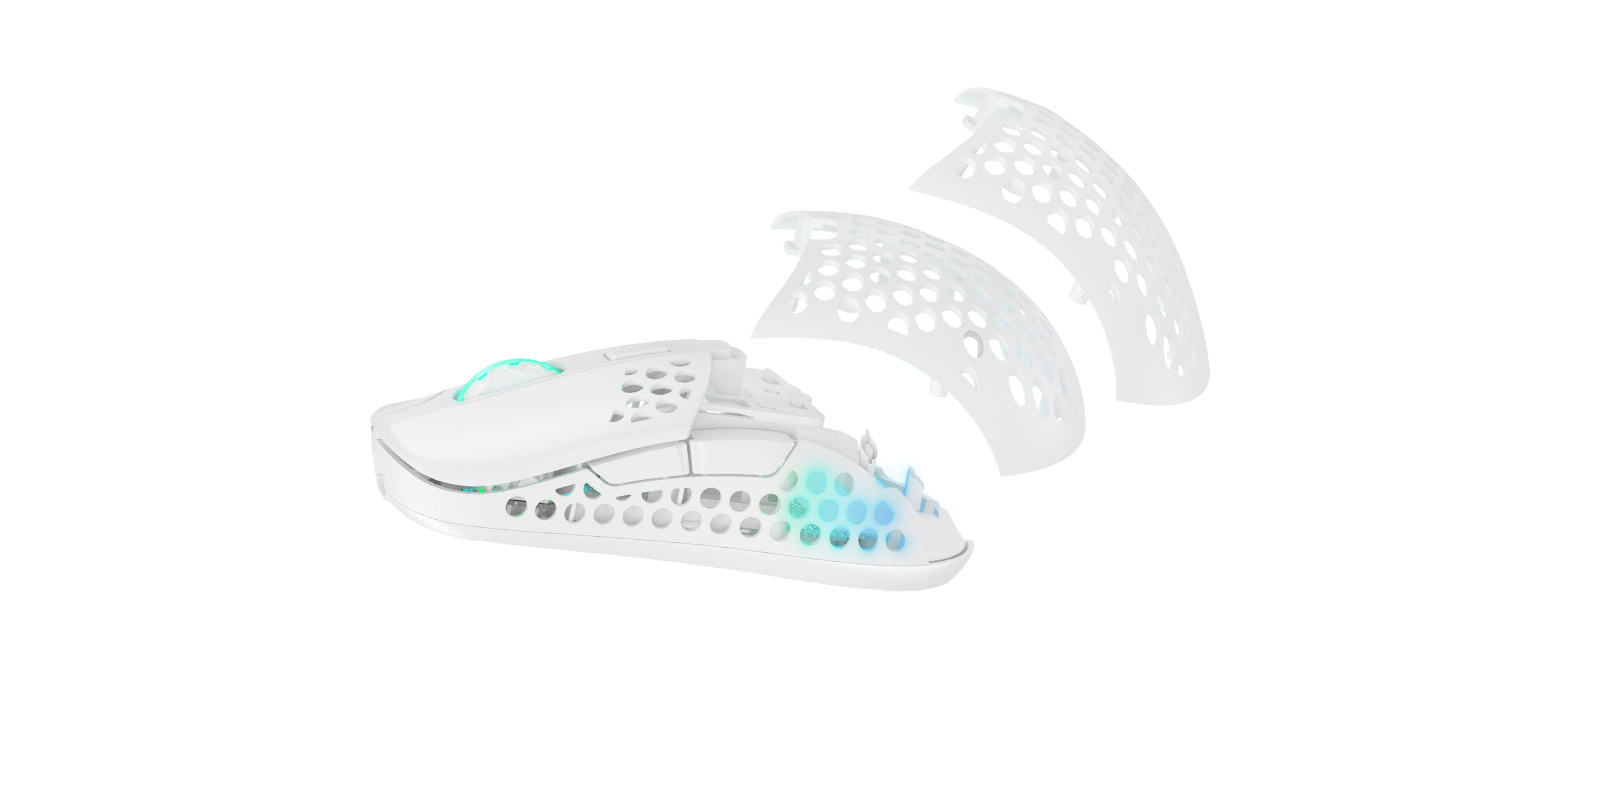 M42-Wireless-White-Gaming-Mouse_gallery06.jpg